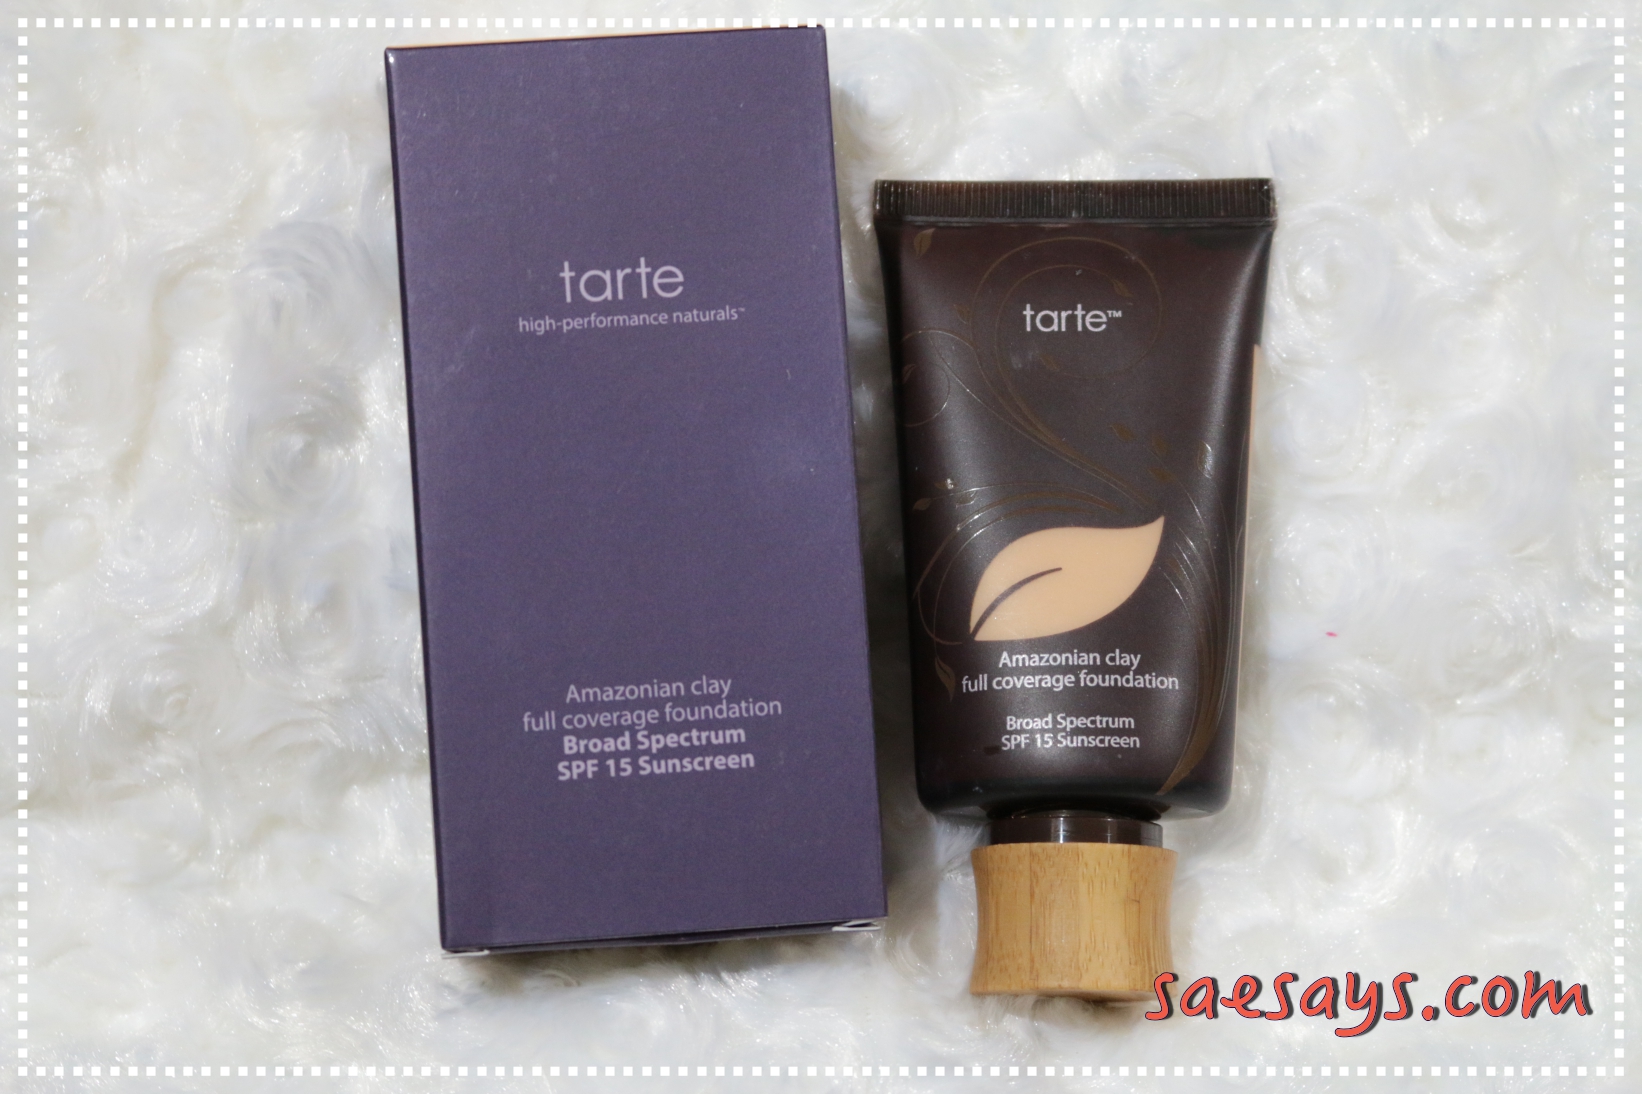 What is Tarte Amazonian Clay?